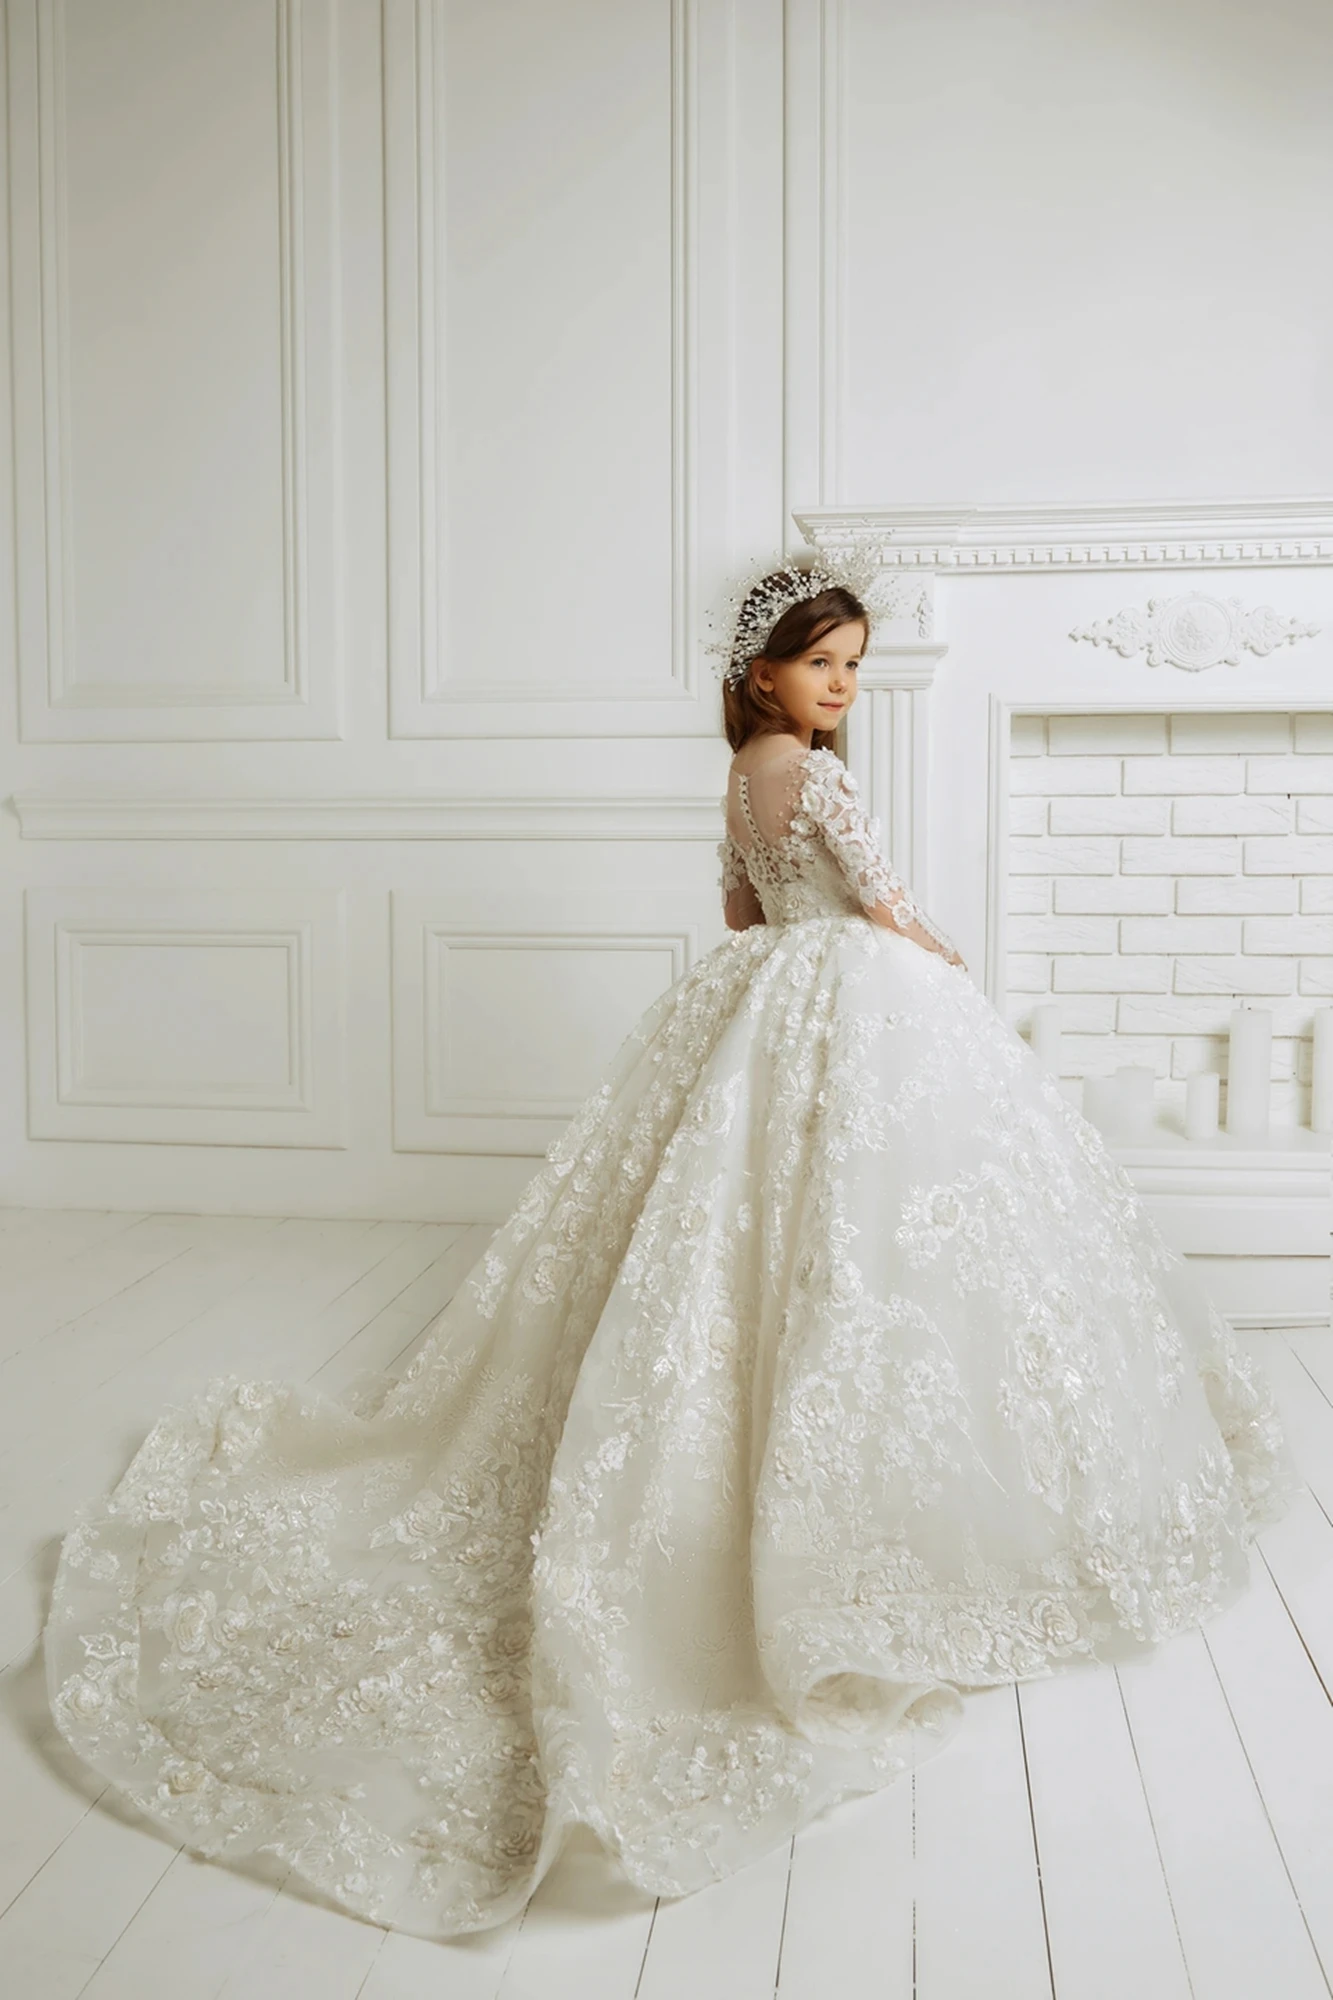 Classy Long Flower Girl Dresses Jewel Neck Full Sleeves with Lace Applique Ball Gown Floor Length Custom Made for Wedding Party